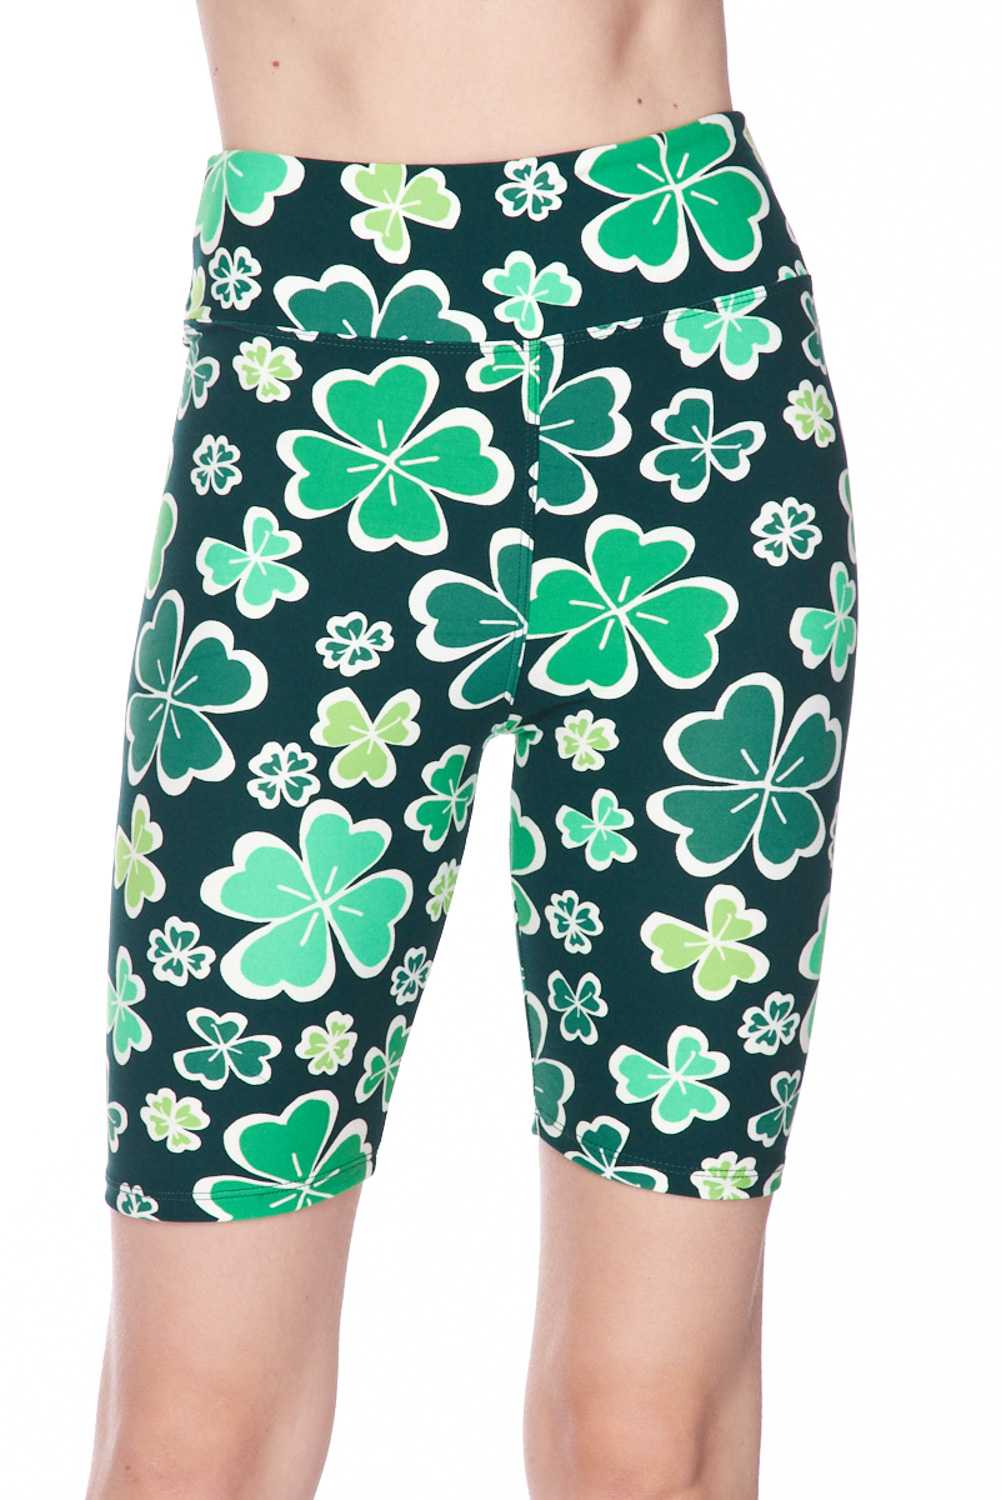 Wholesale Buttery Smooth Green Irish Clover Plus Size Shorts - 3 Inch